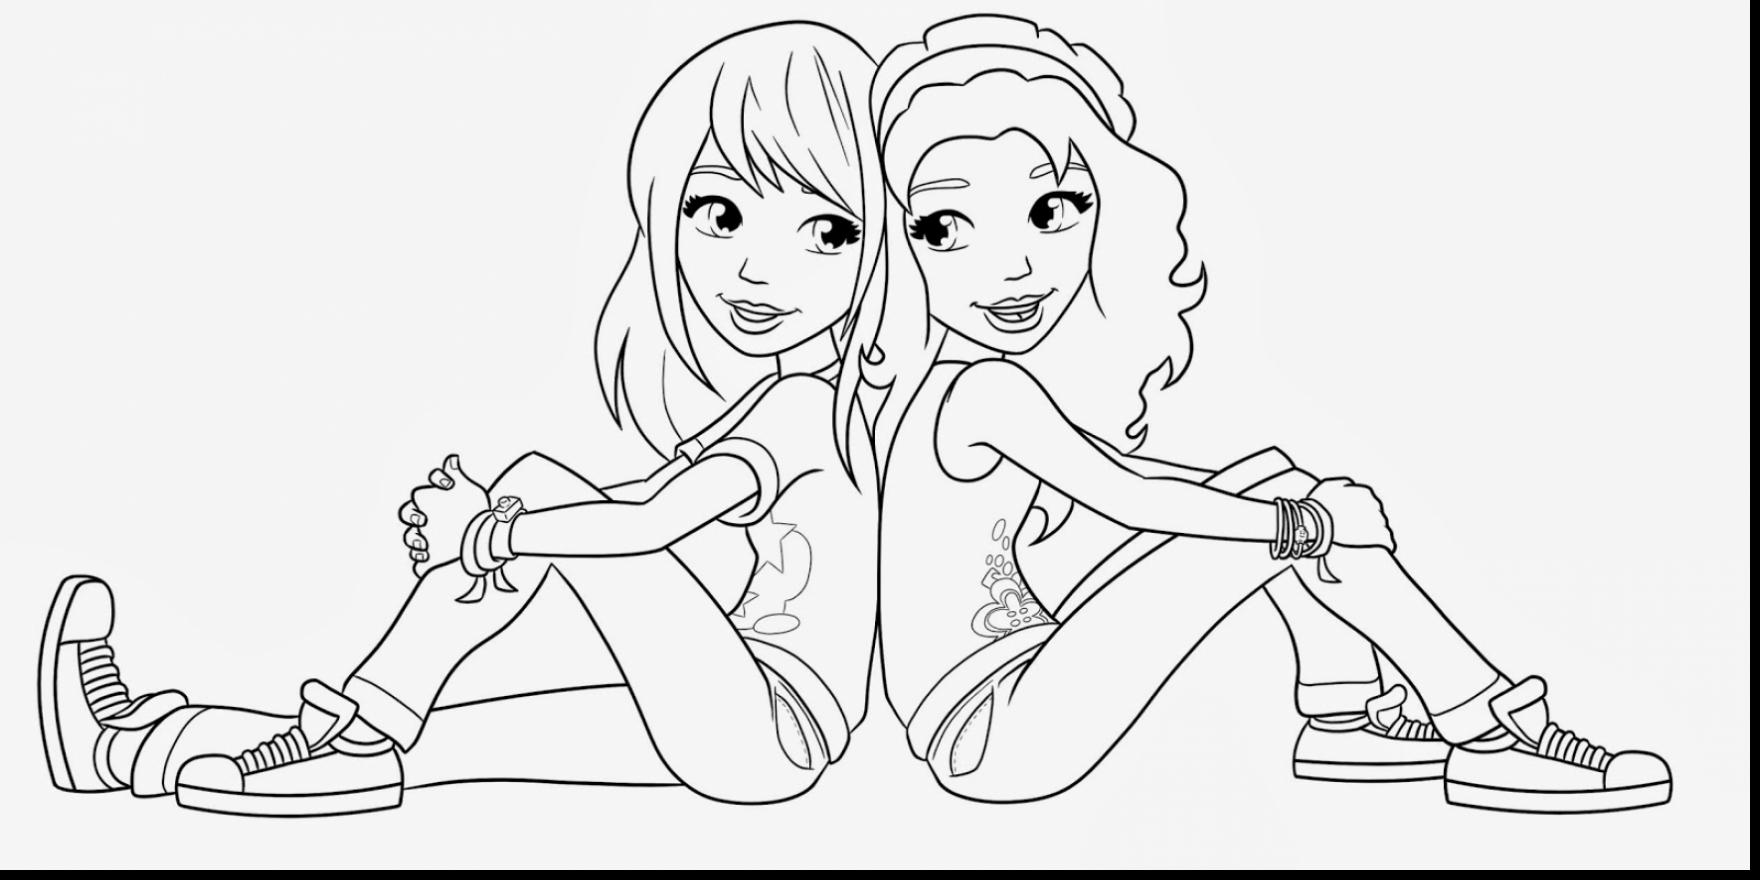 Best Friends Coloring Pages Printable at GetDrawings.com | Free for